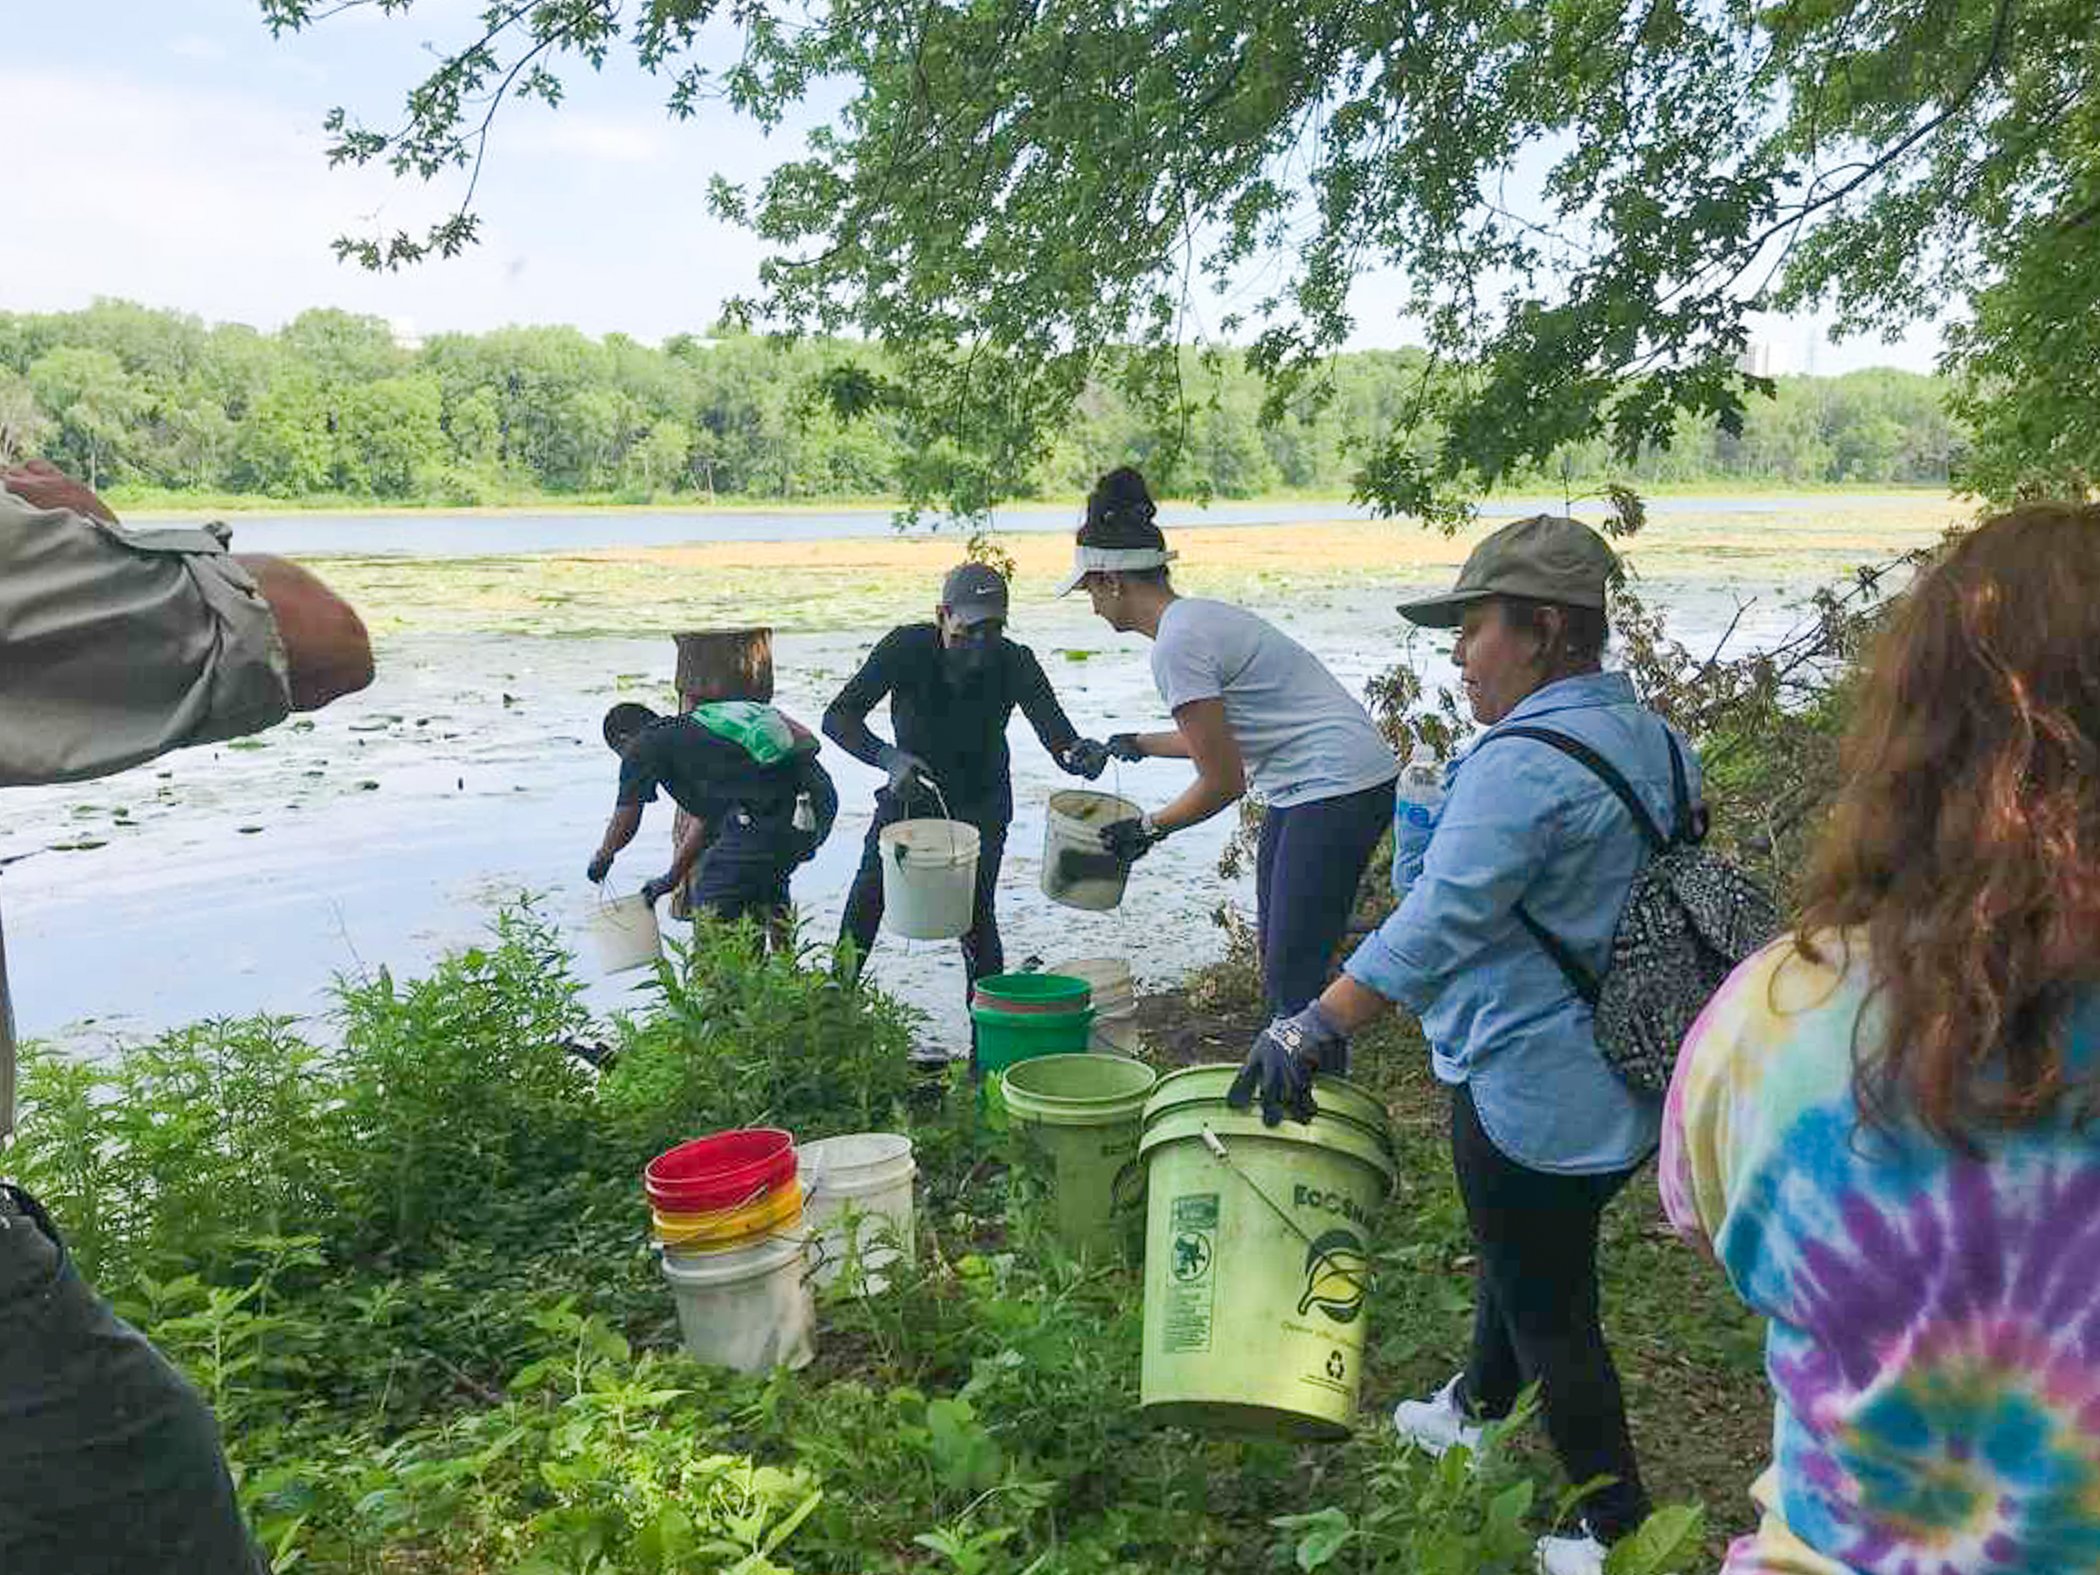  People work together to gather water from a lake by making an assembly line of buckets. 